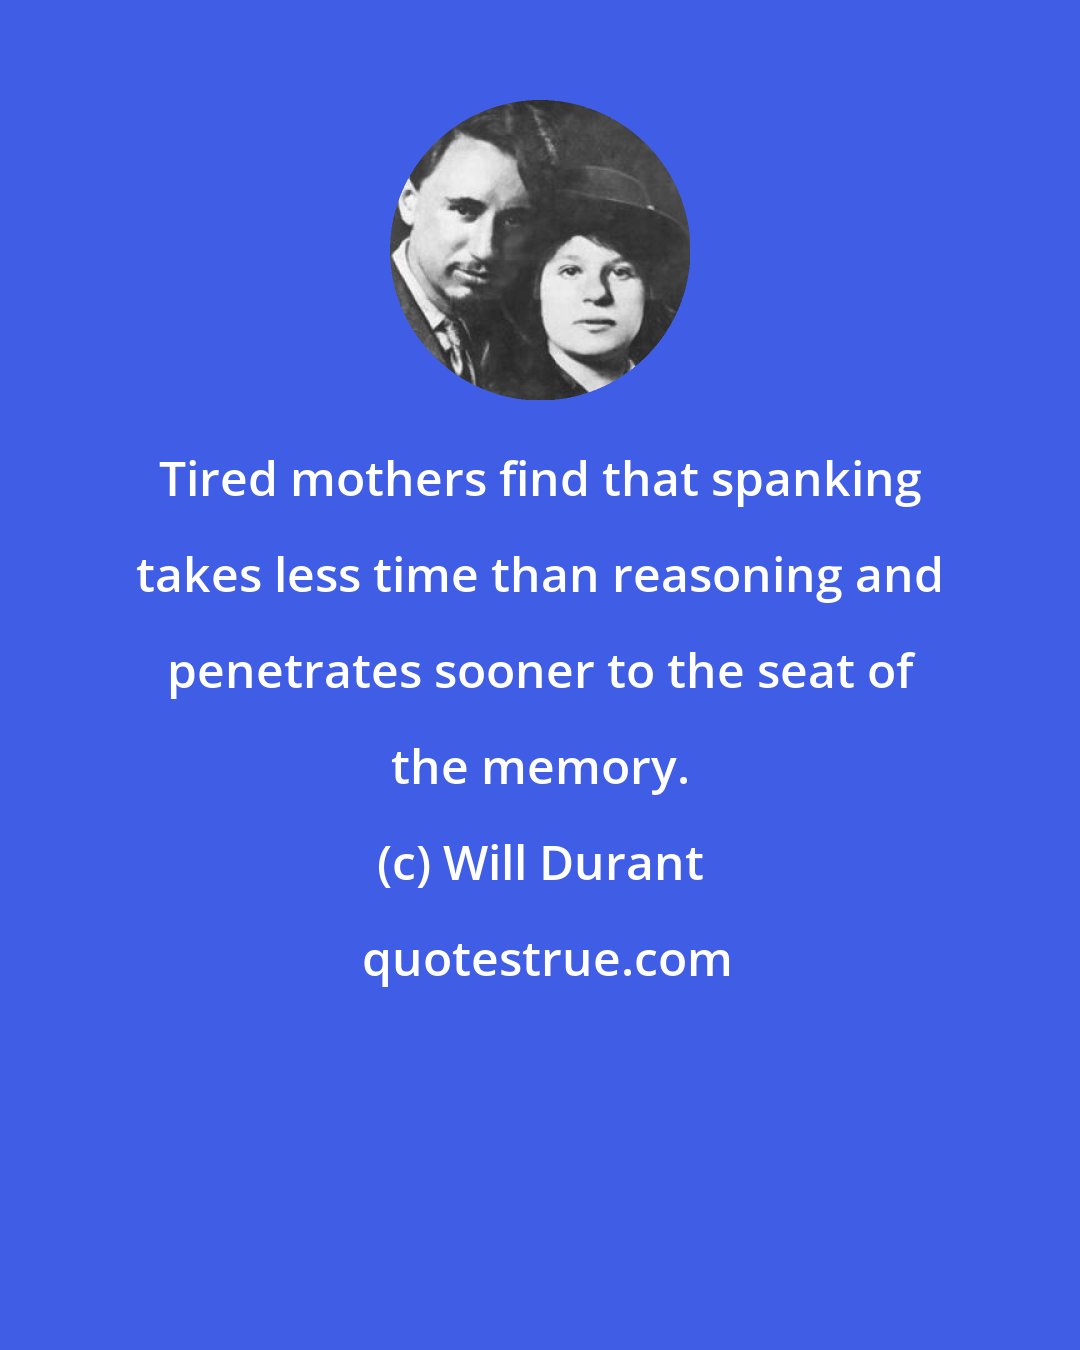 Will Durant: Tired mothers find that spanking takes less time than reasoning and penetrates sooner to the seat of the memory.